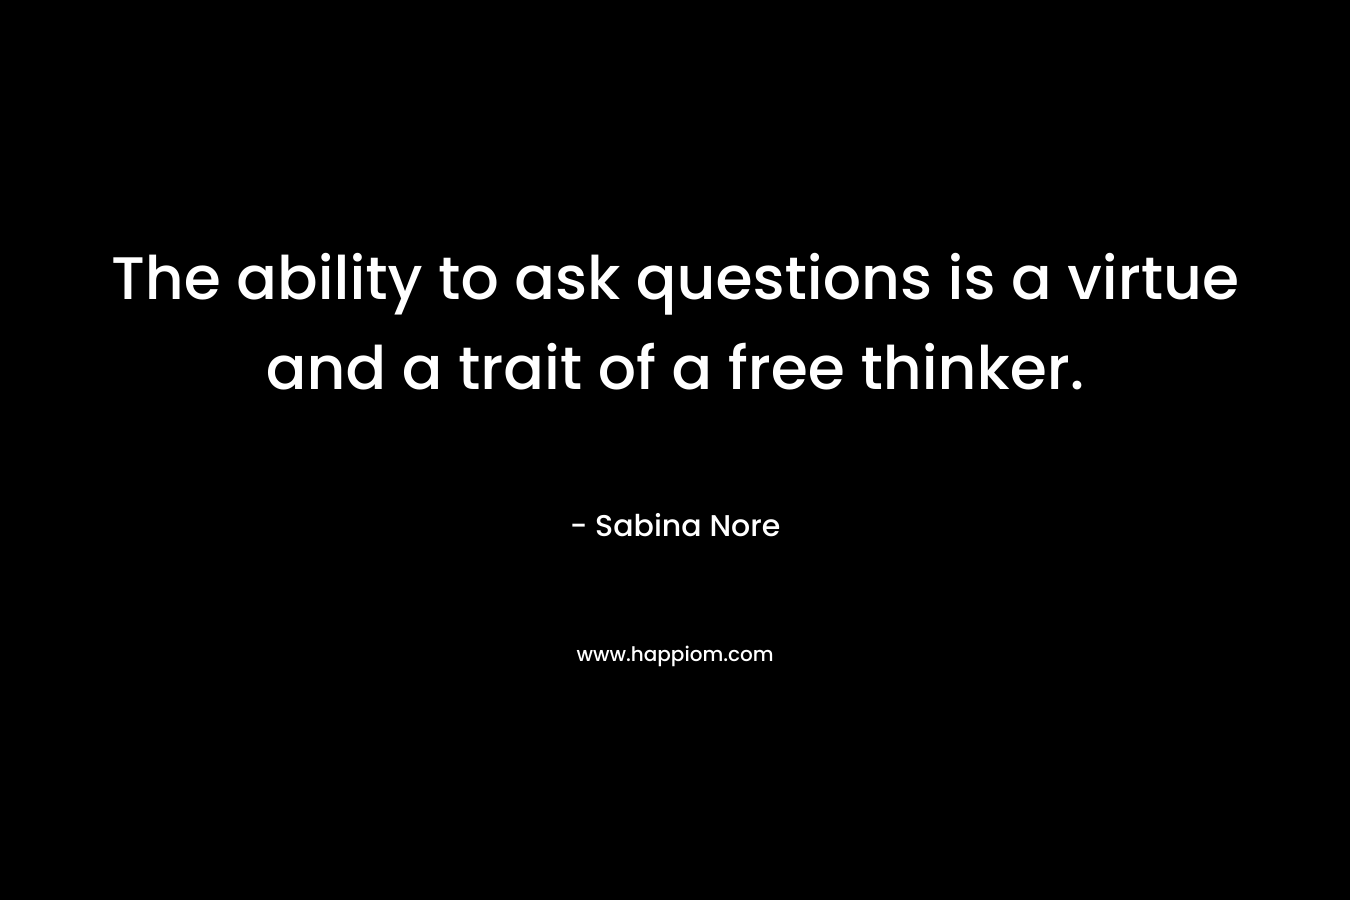 The ability to ask questions is a virtue and a trait of a free thinker.